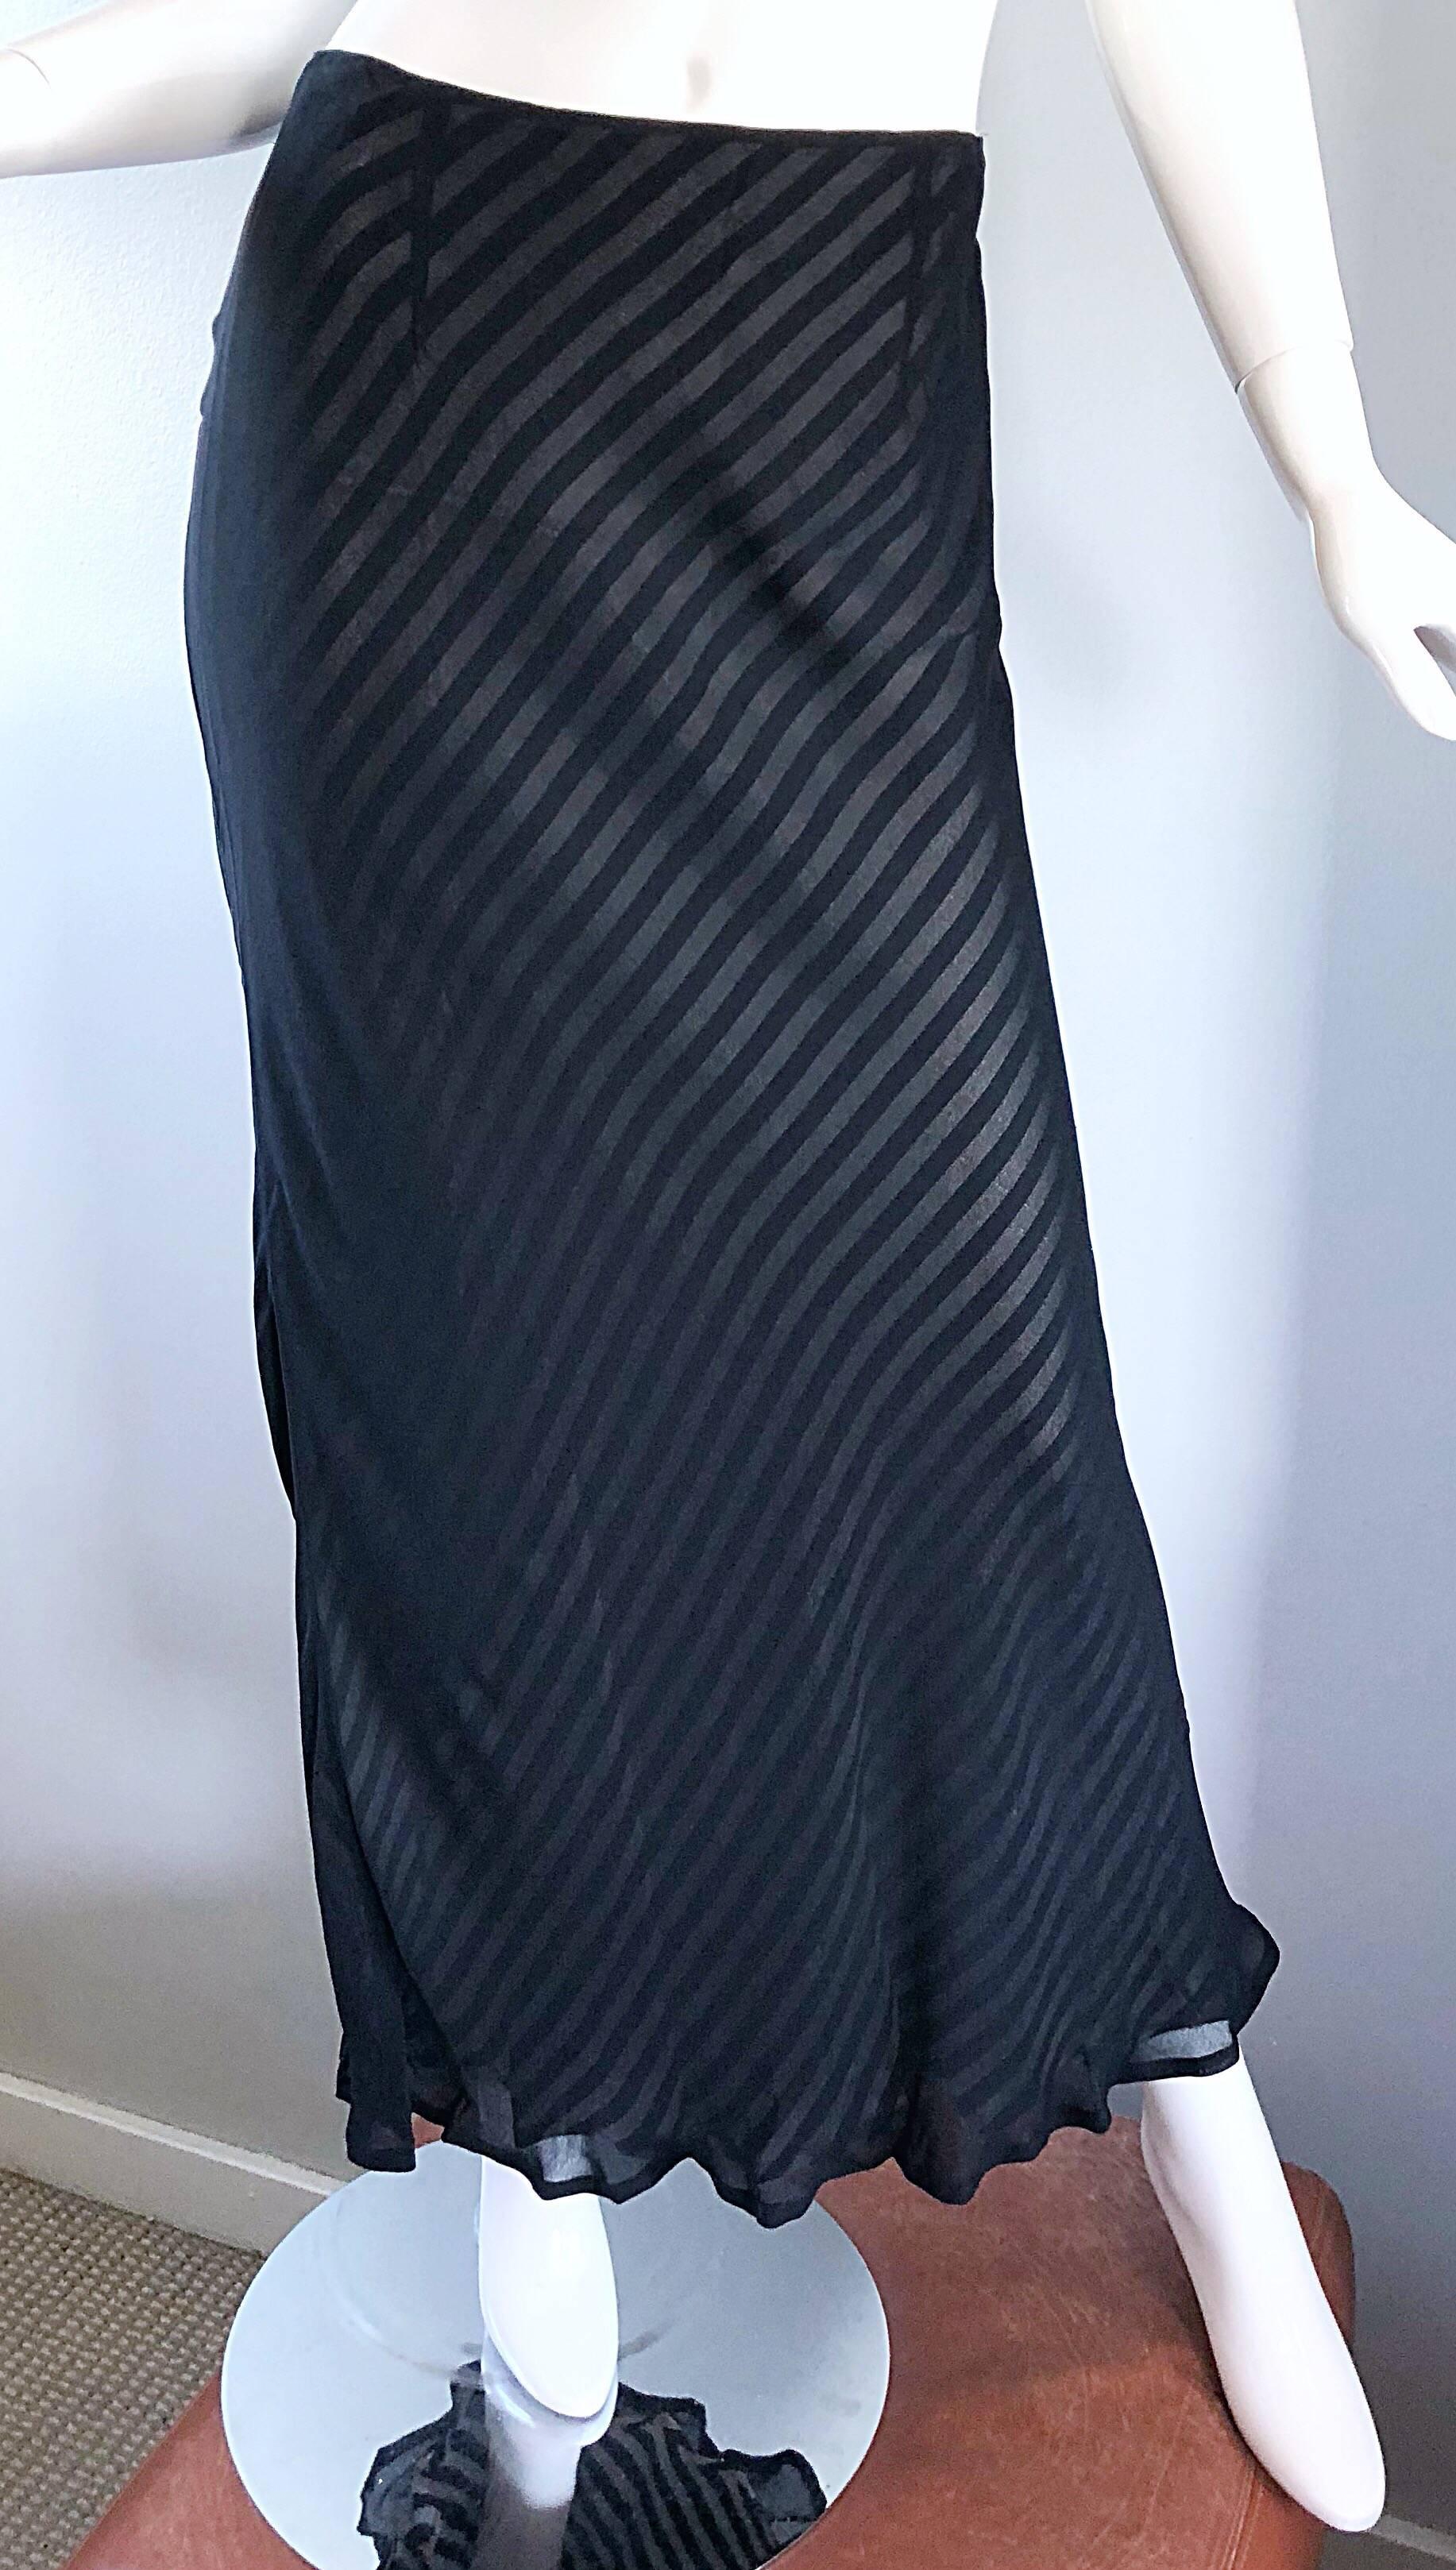 Moschino Cheap & Chic 1990s Size 12 Black and White Striped Vintage Maxi Skirt For Sale 3